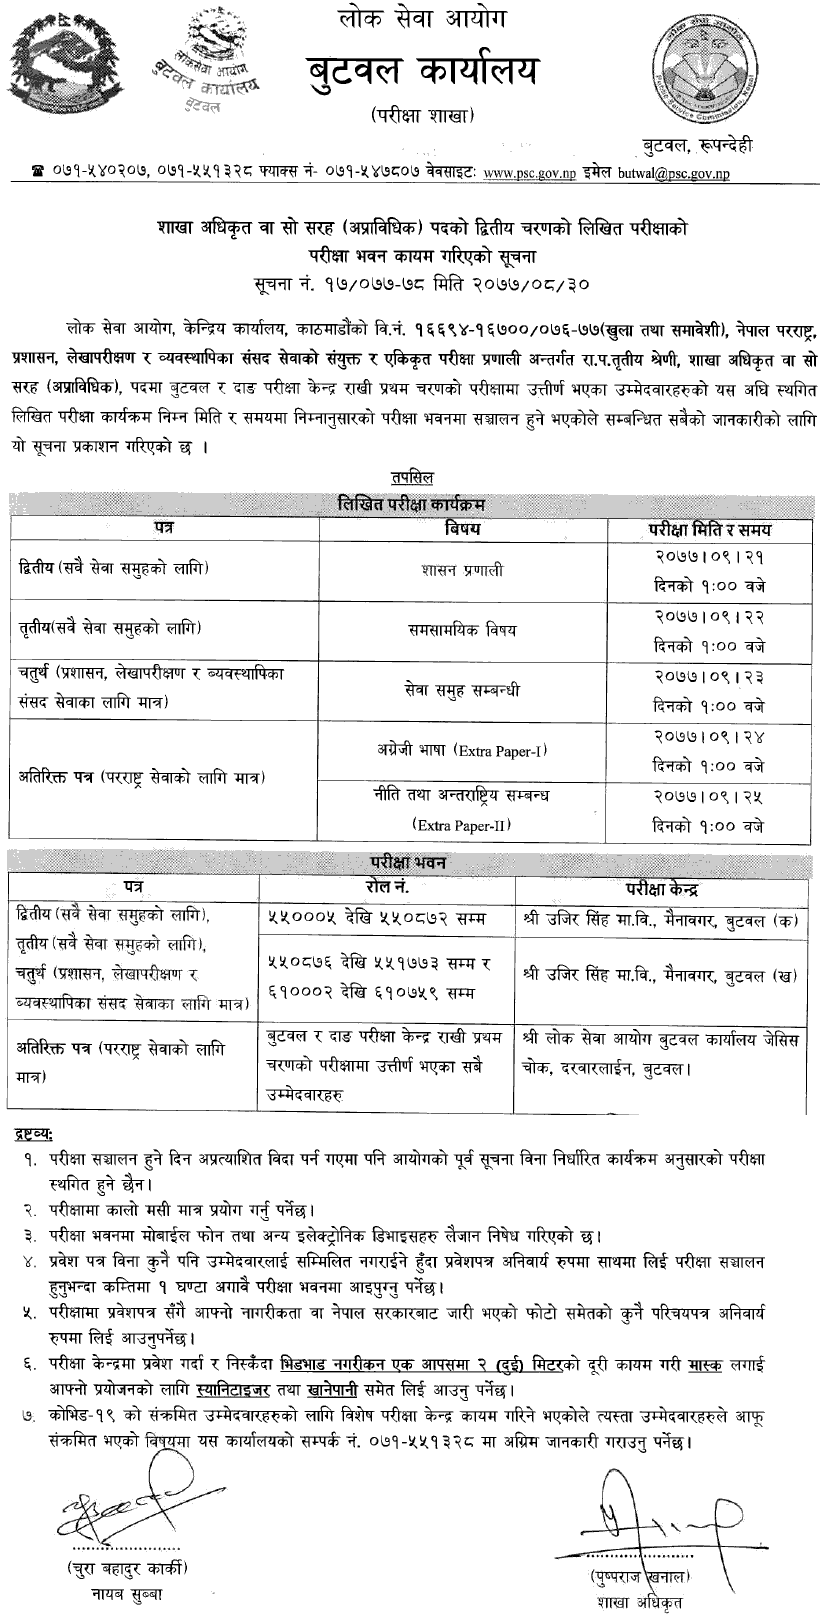 Lok Sewa Aayog Butwal Section Officer Written Exam Center Second Phase 1